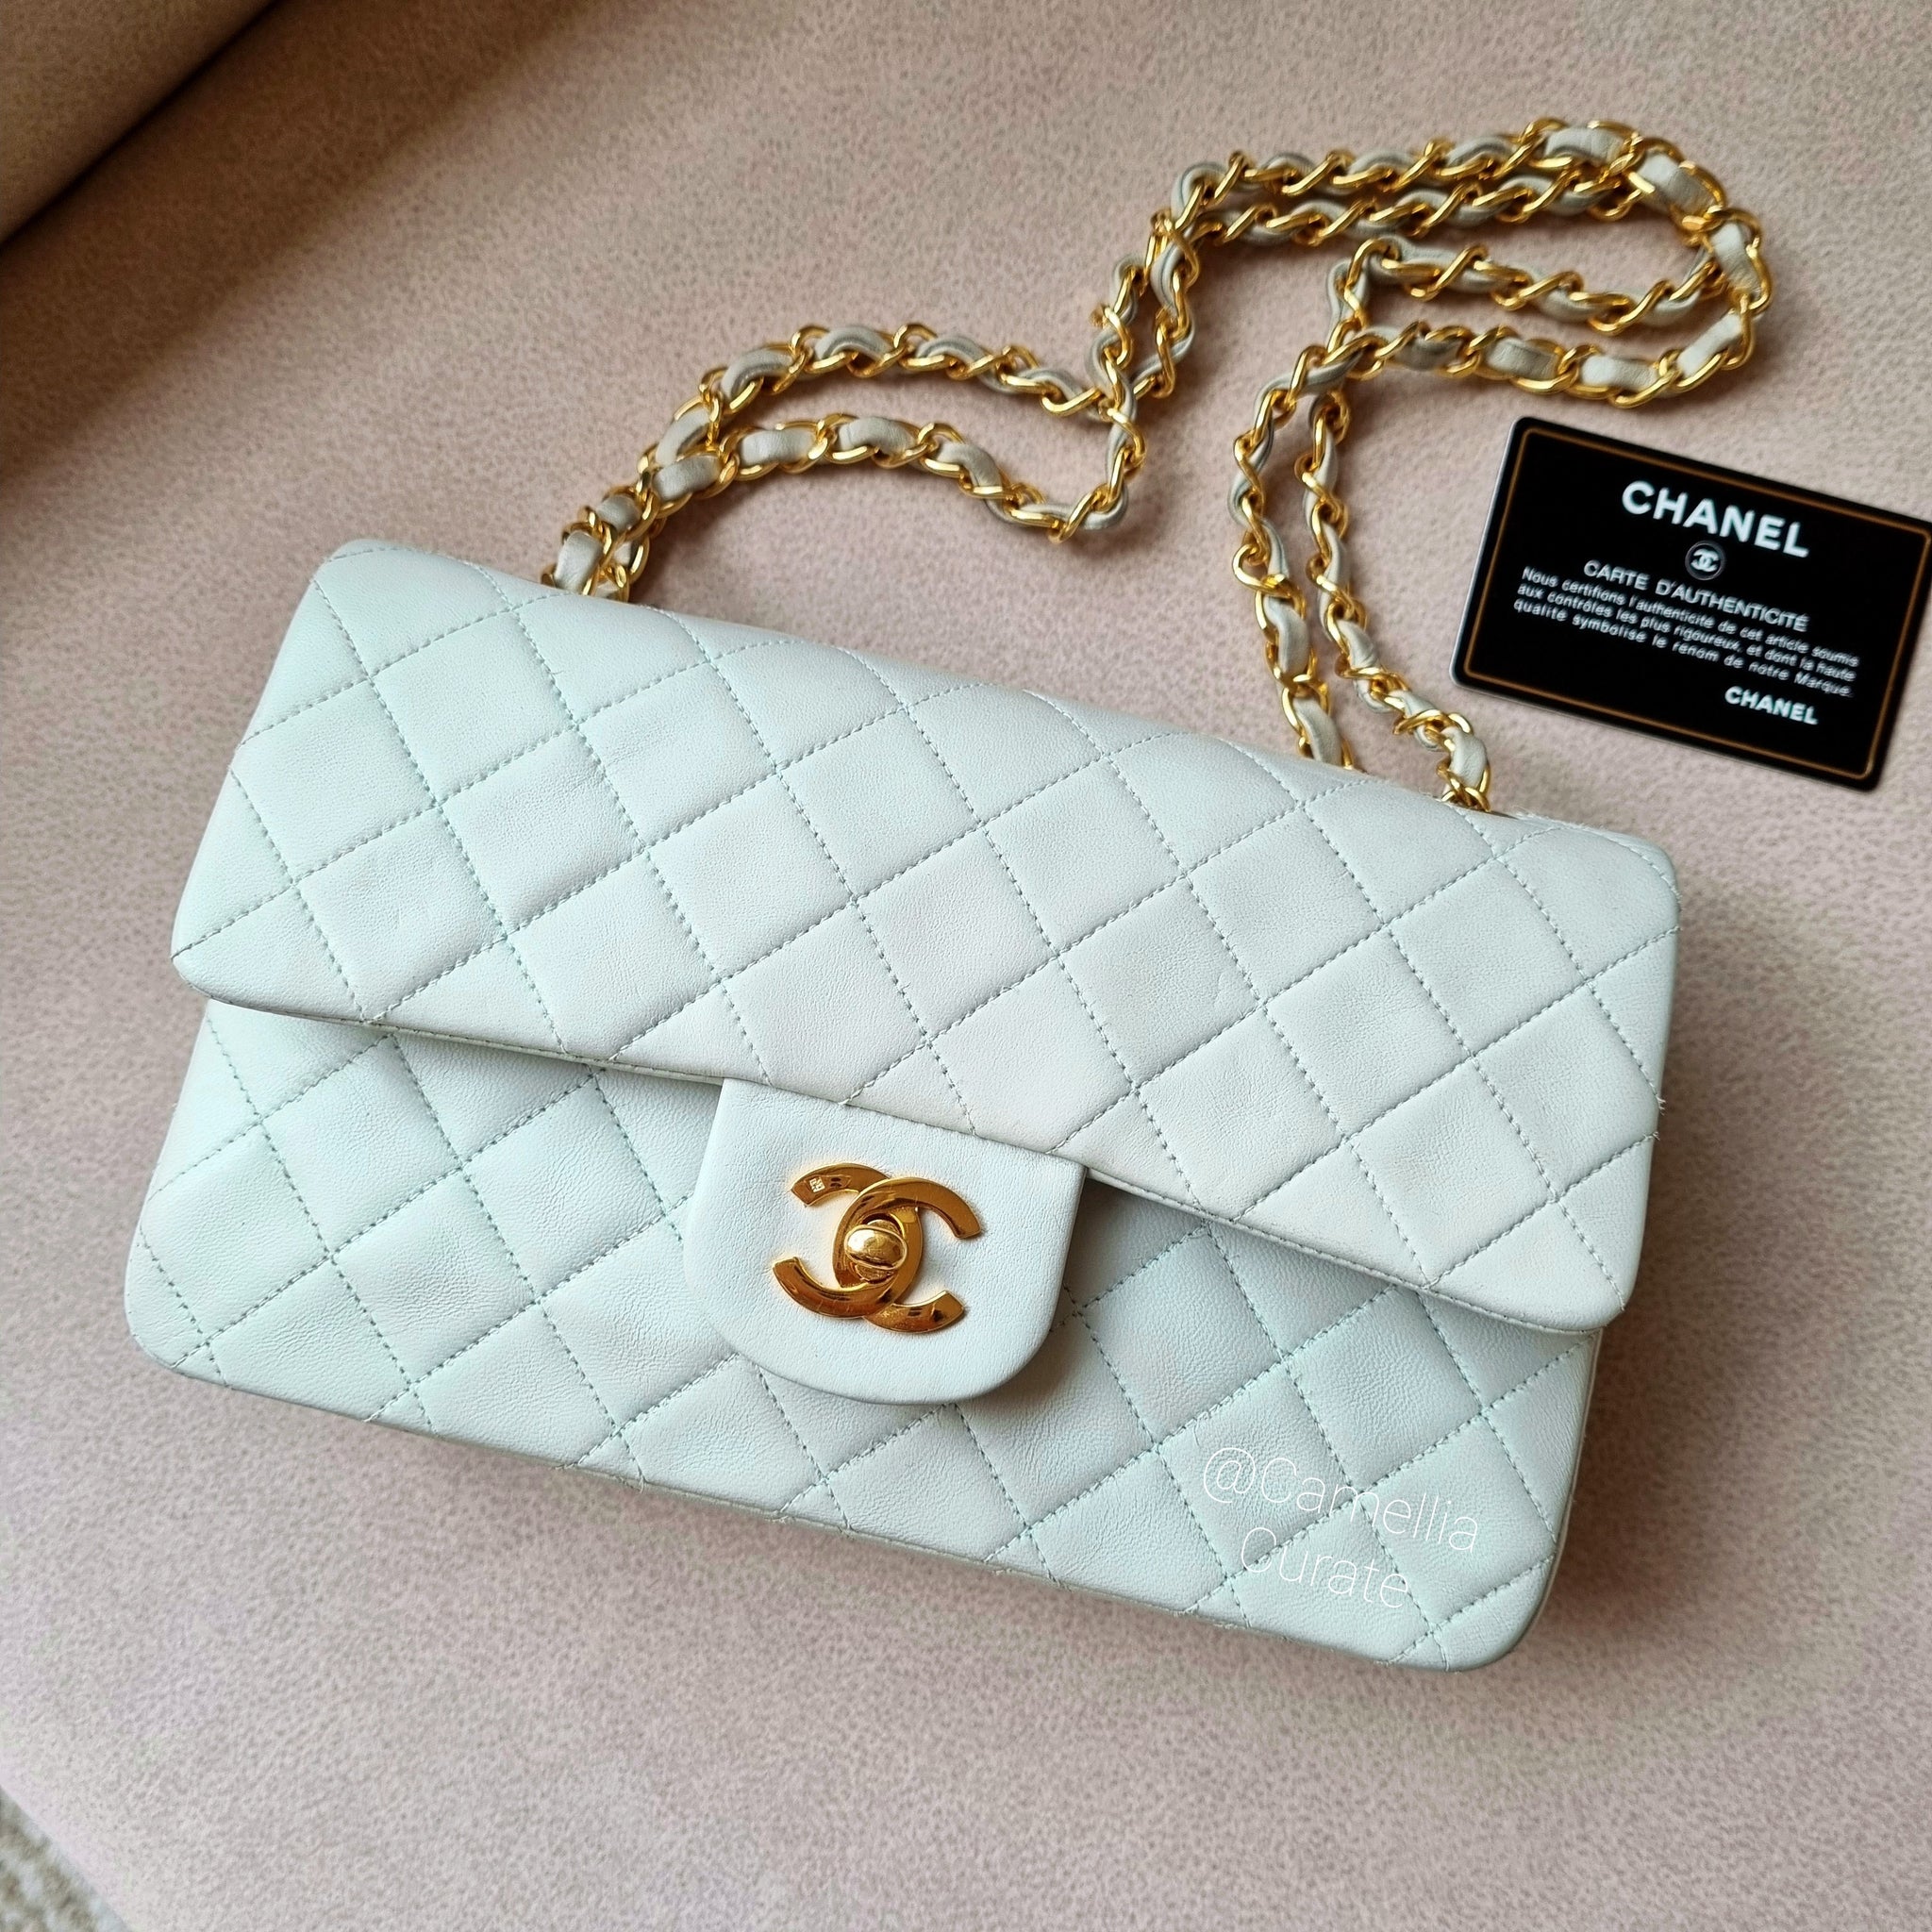 Just got the vintage Chanel classic flap with 24k gold hardware of